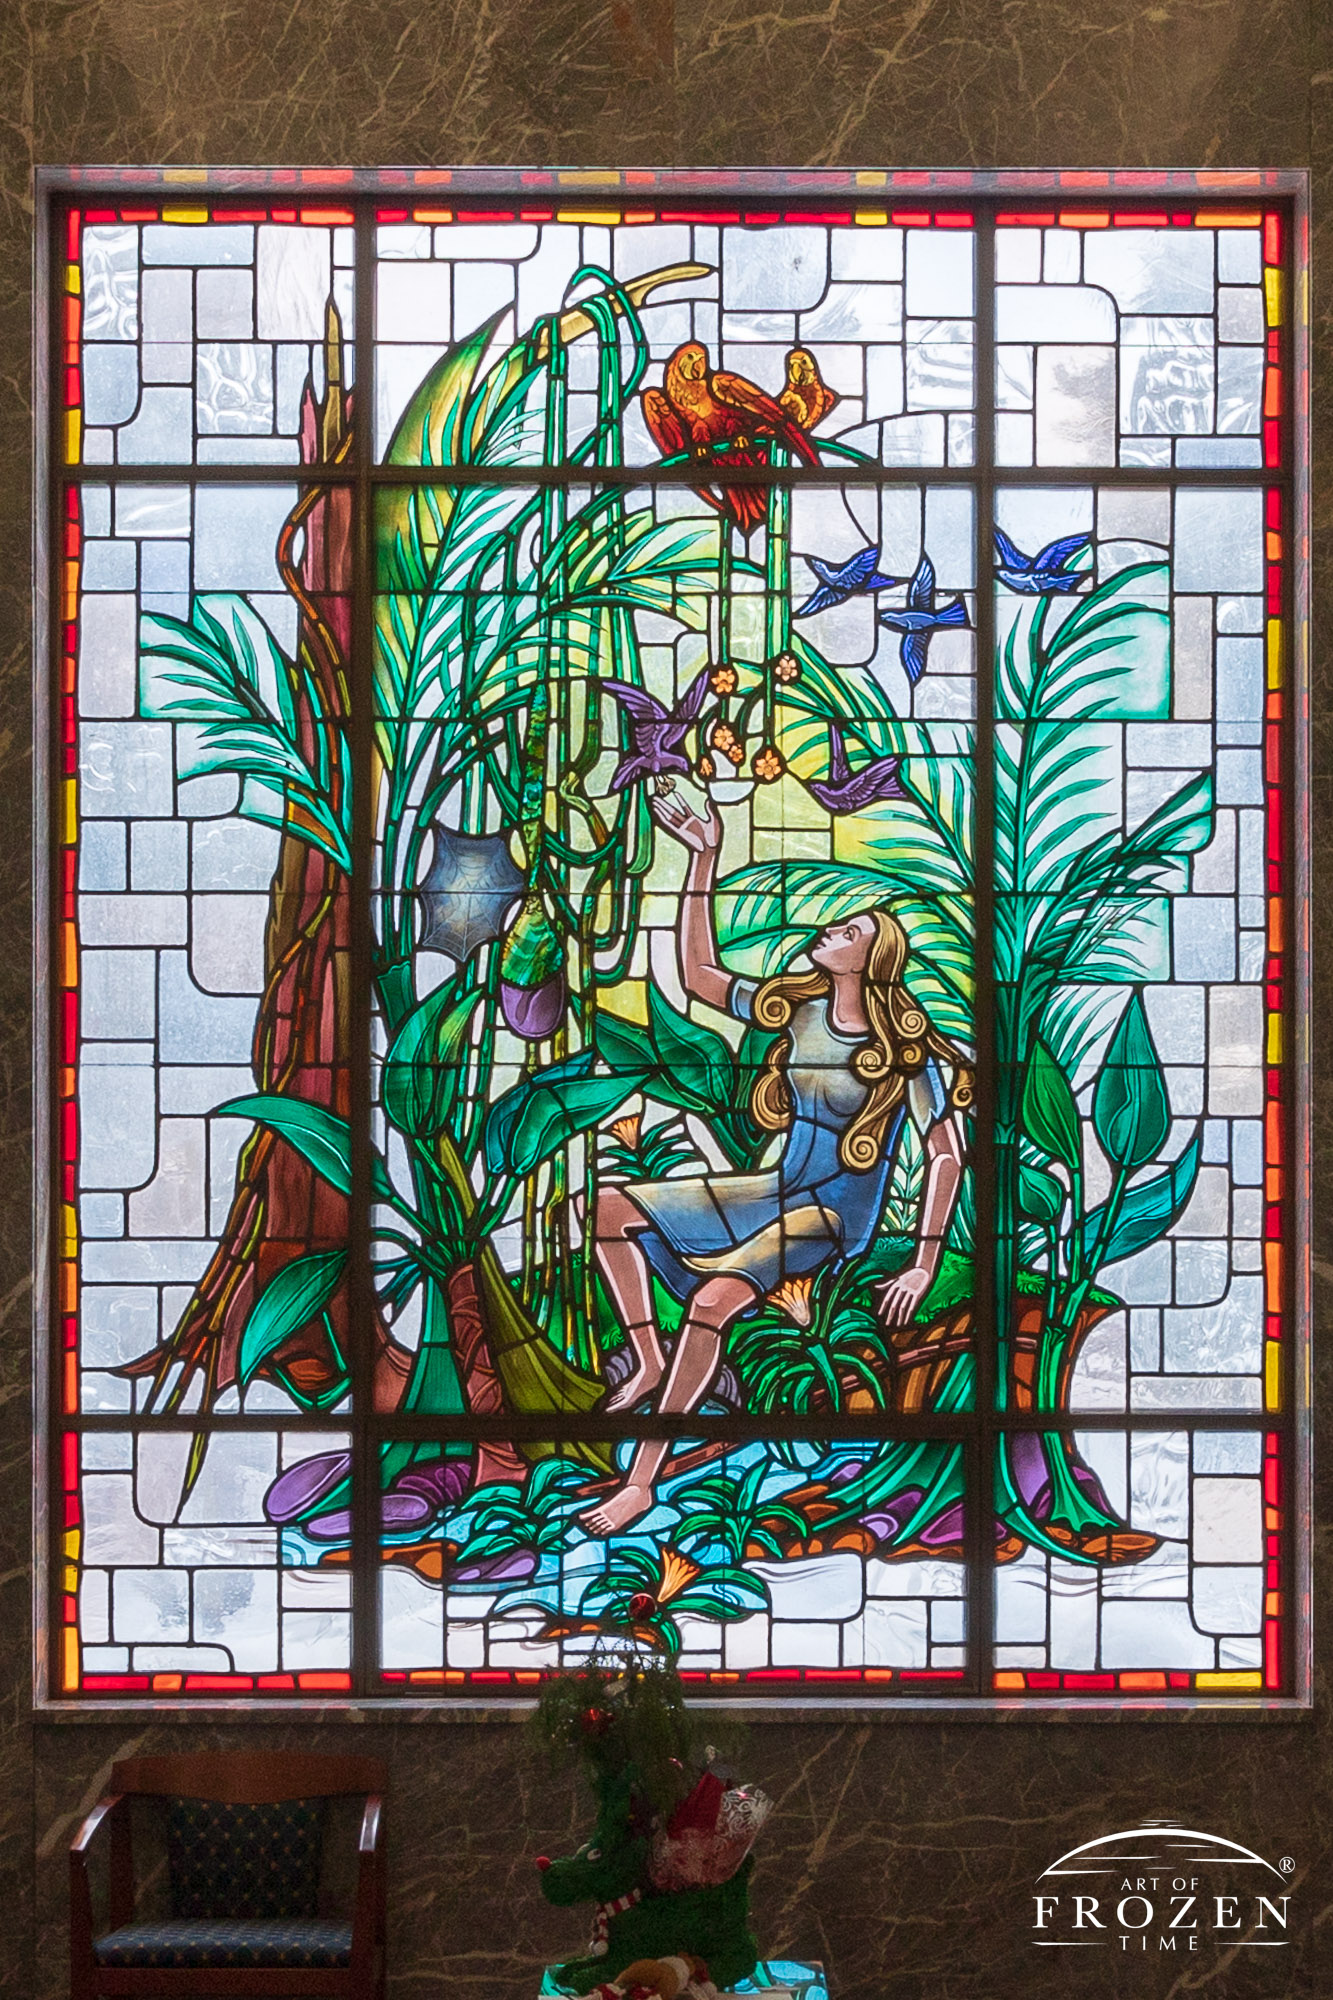 Historic stained-glass windows created by Louis Comfort Tiffany featuring his opalescent glass depicting a young lady sitting in a garden reaching towards birds.